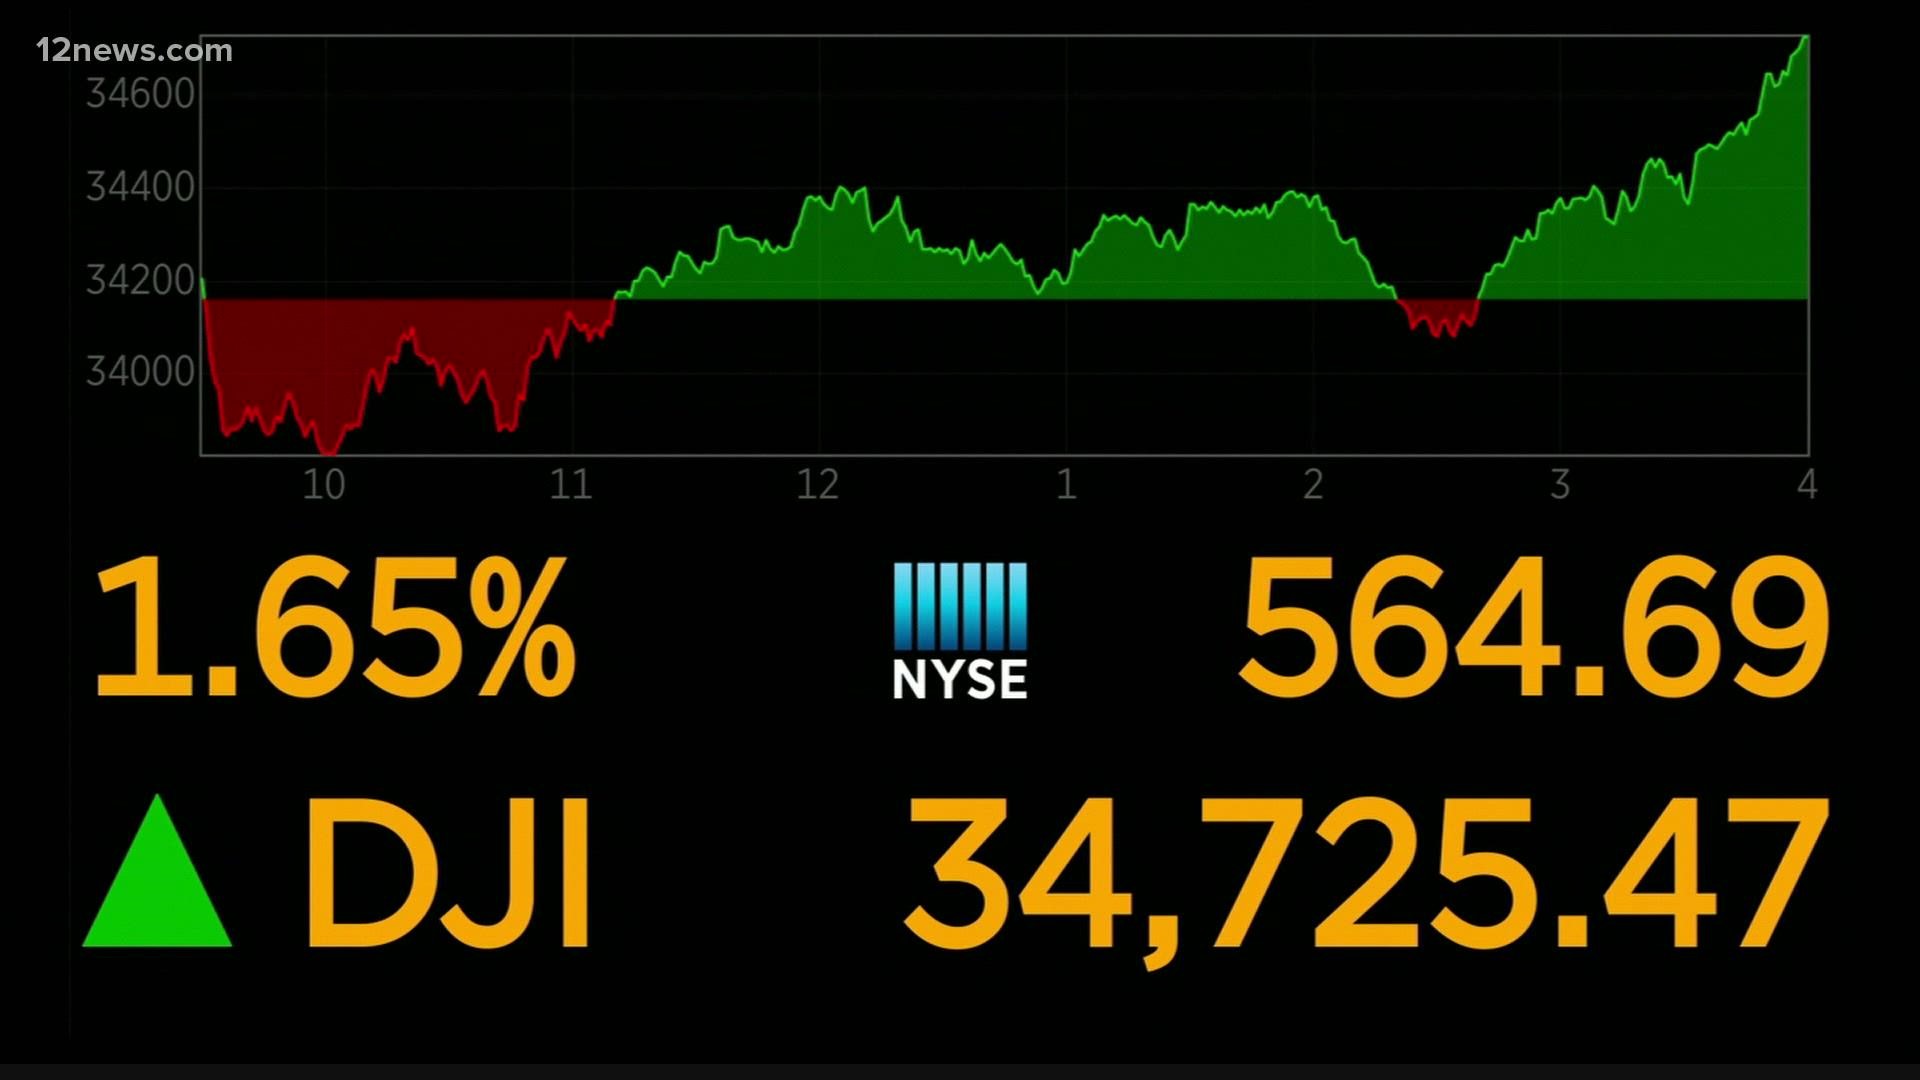 Looking back a week ago, U.S. stocks started in the red, with the Dow dropping more than 1,000 points.